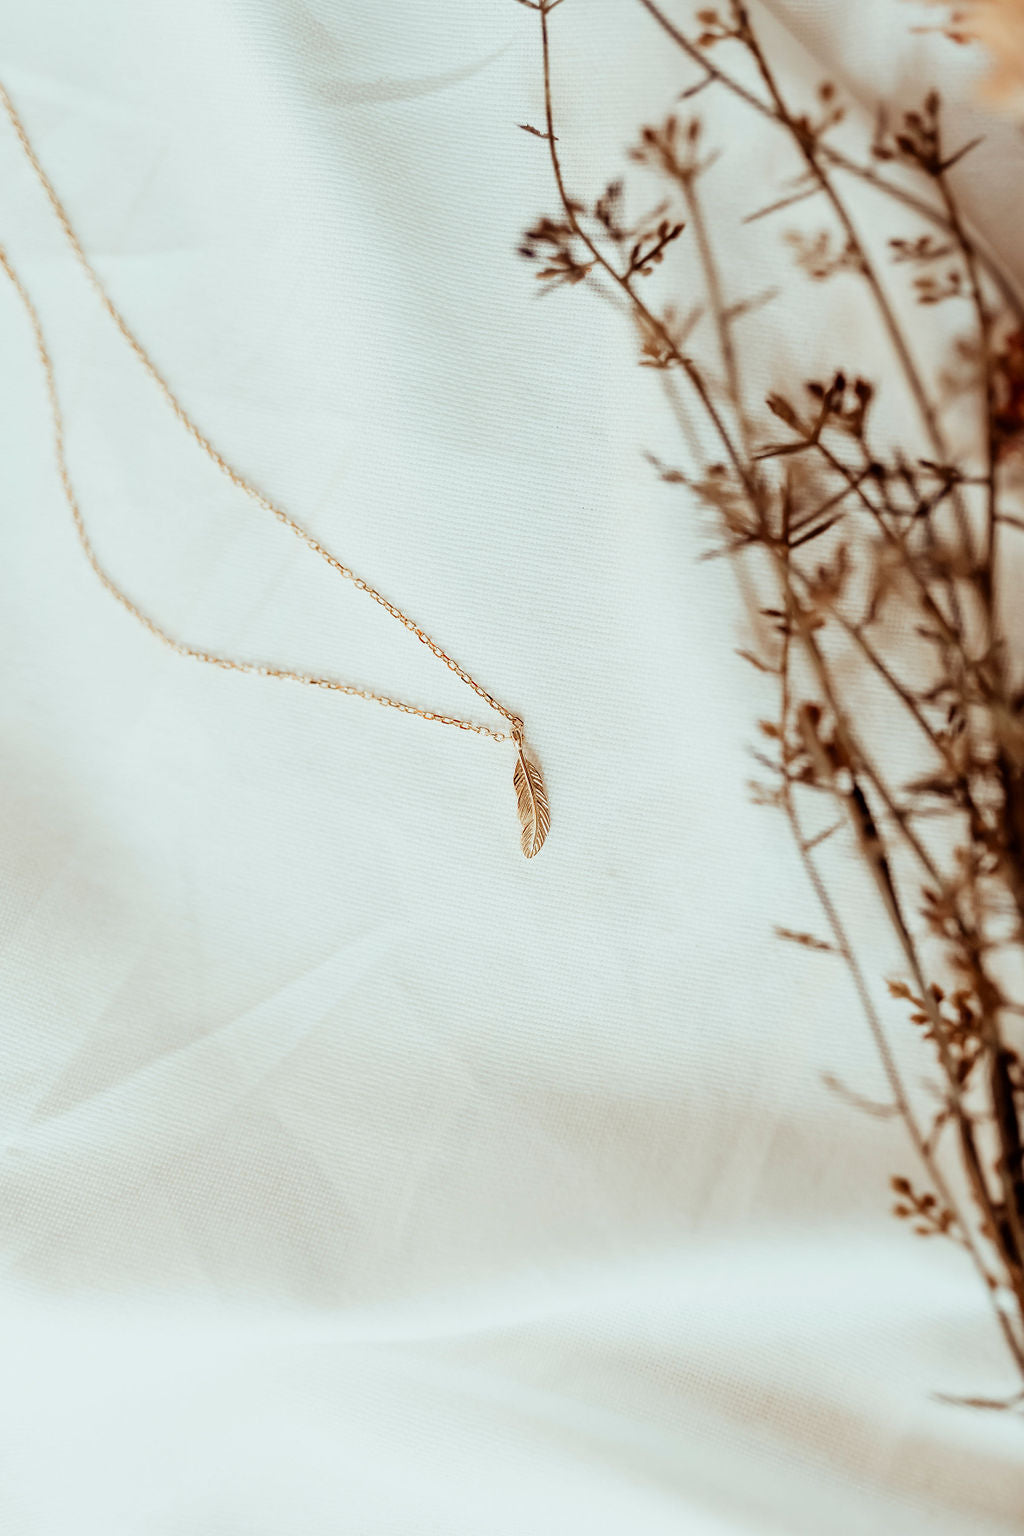 gold feather necklace zoomed out